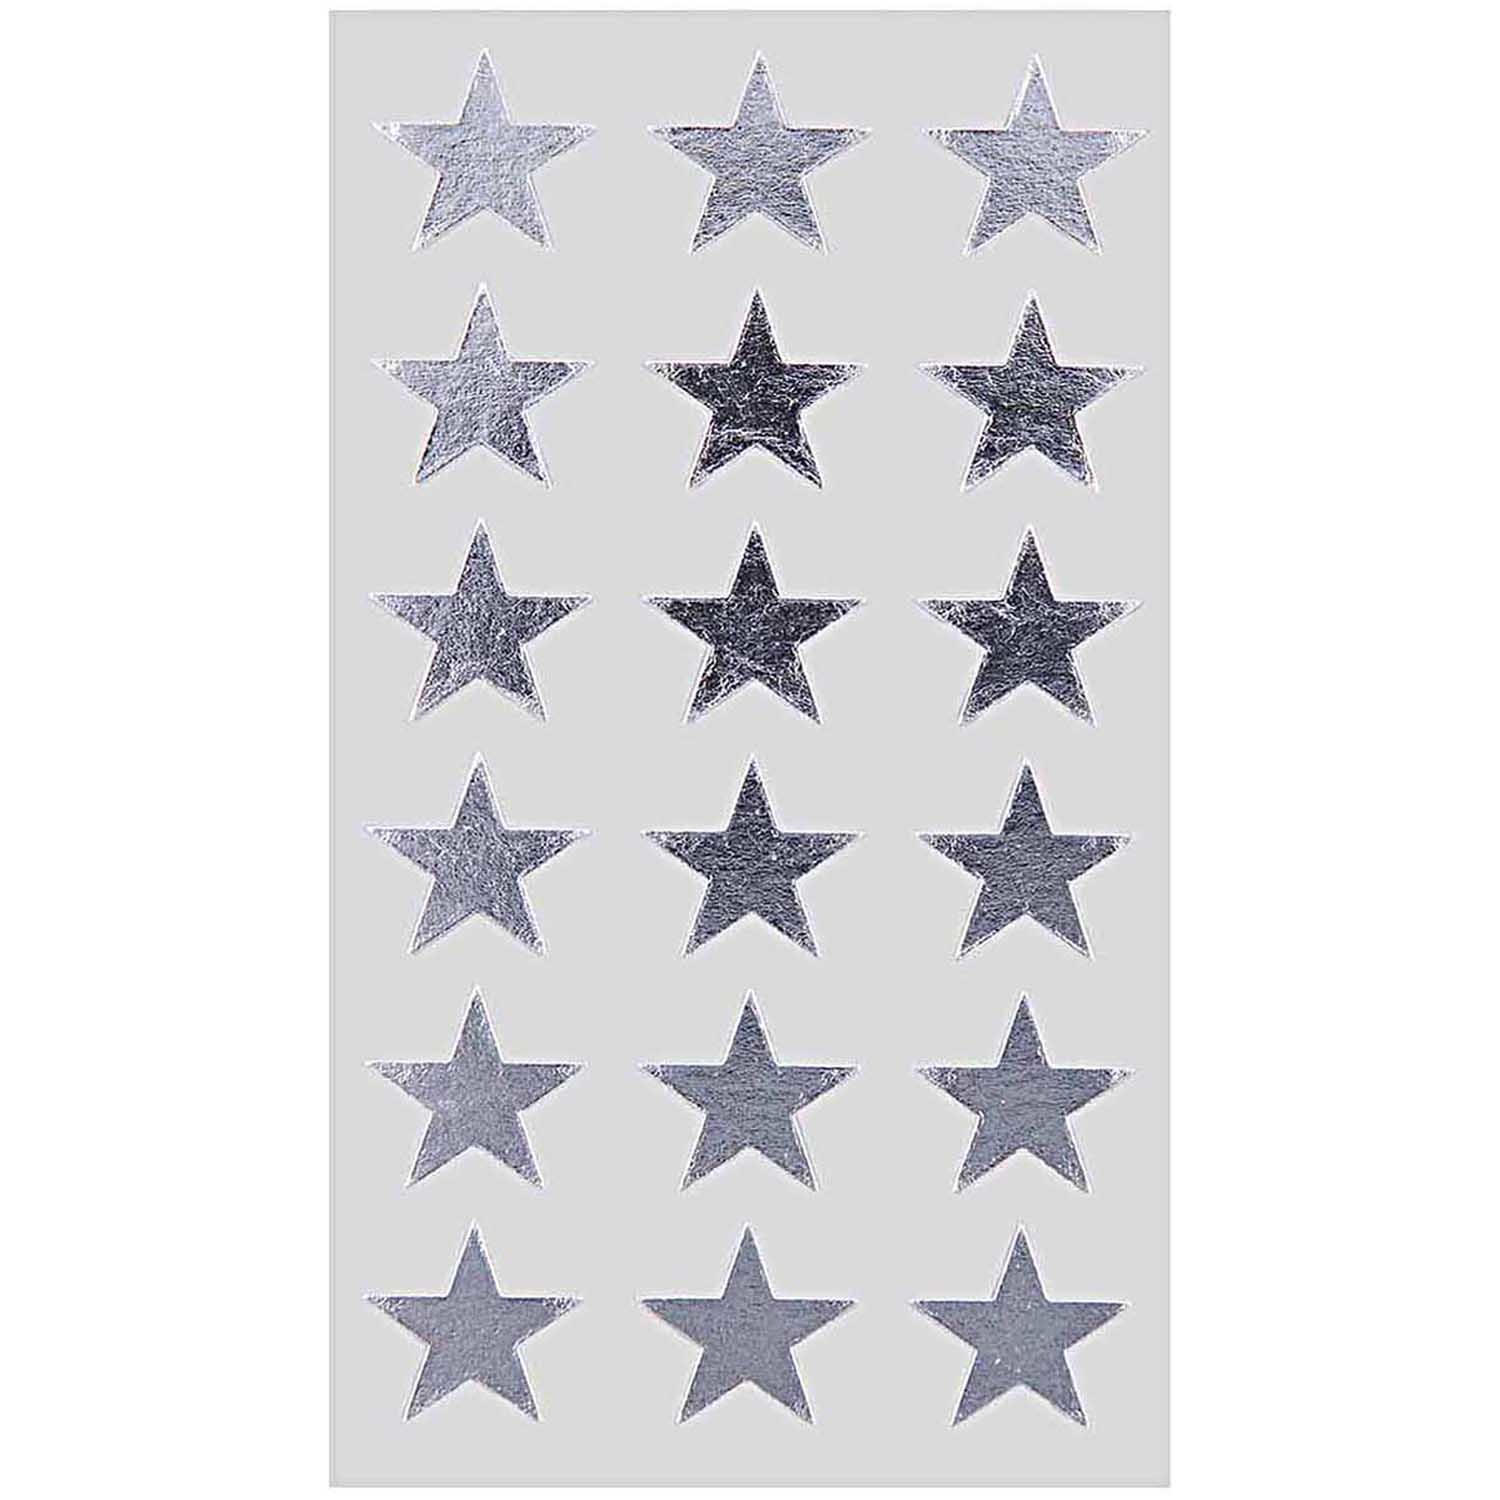 Rico NAY STICKERS STARS 18MM, SILVER 4 SHEETS